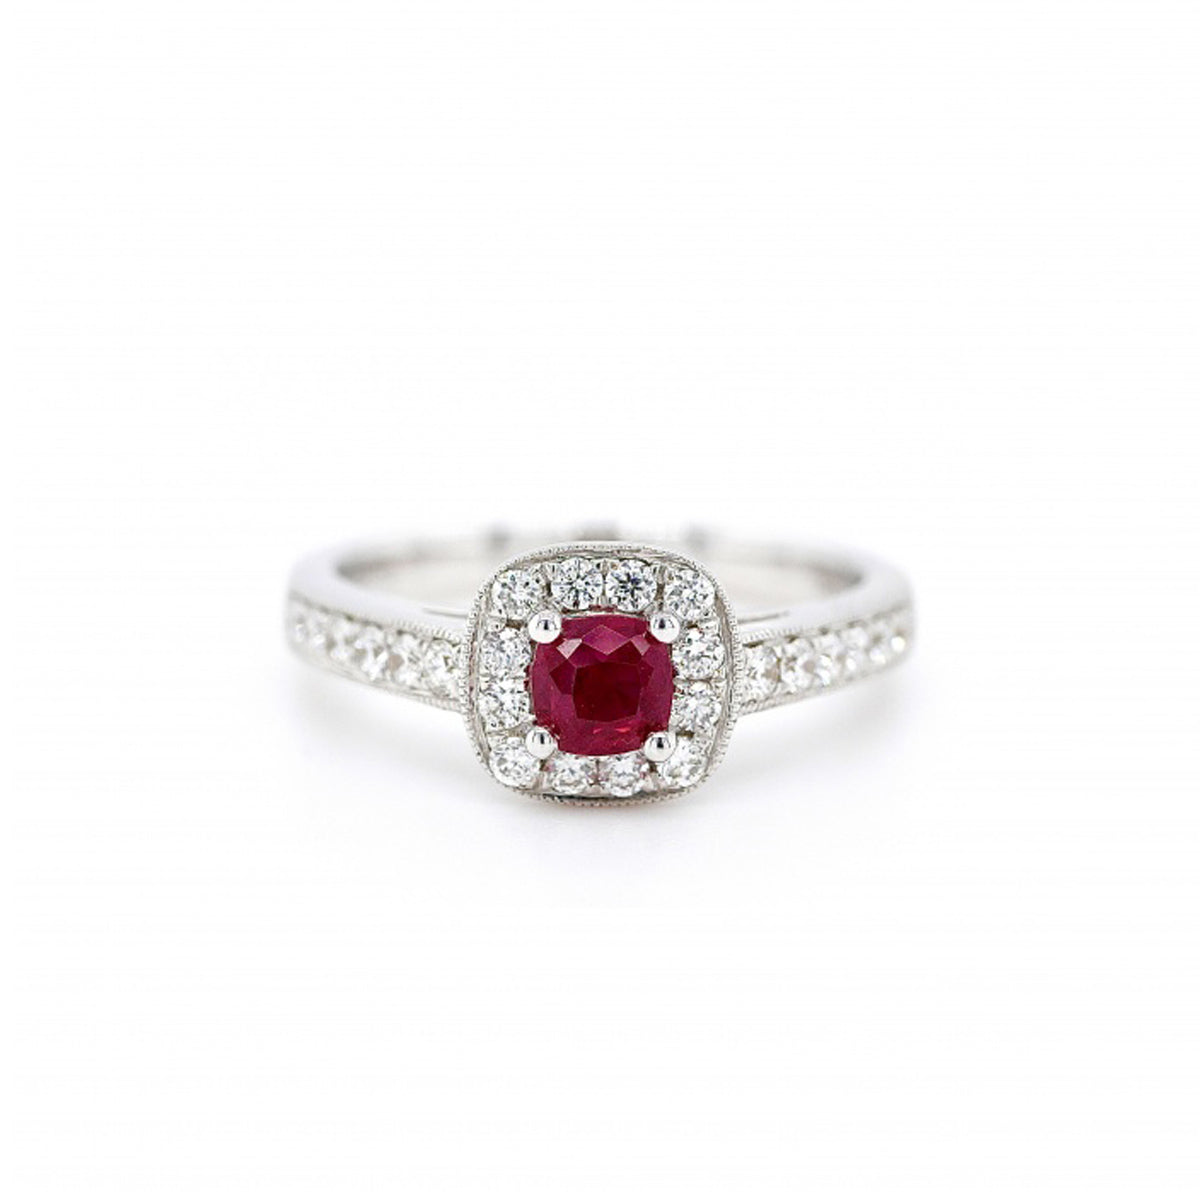 18ct White Gold Cushion-cut Ruby and Diamond Ring